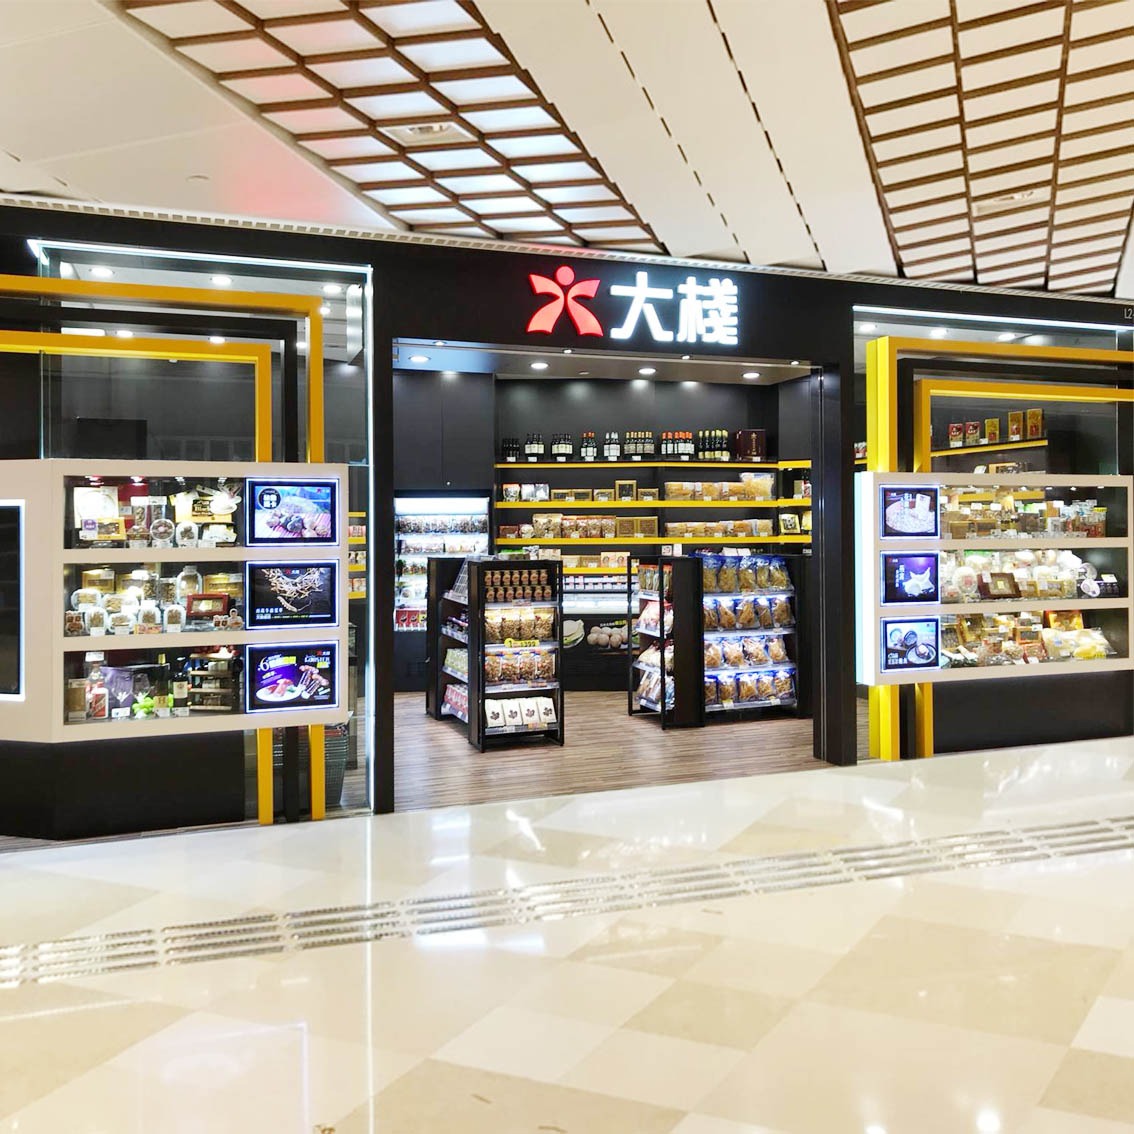 MaxChoice's V Walk outlet in Nam Cheong